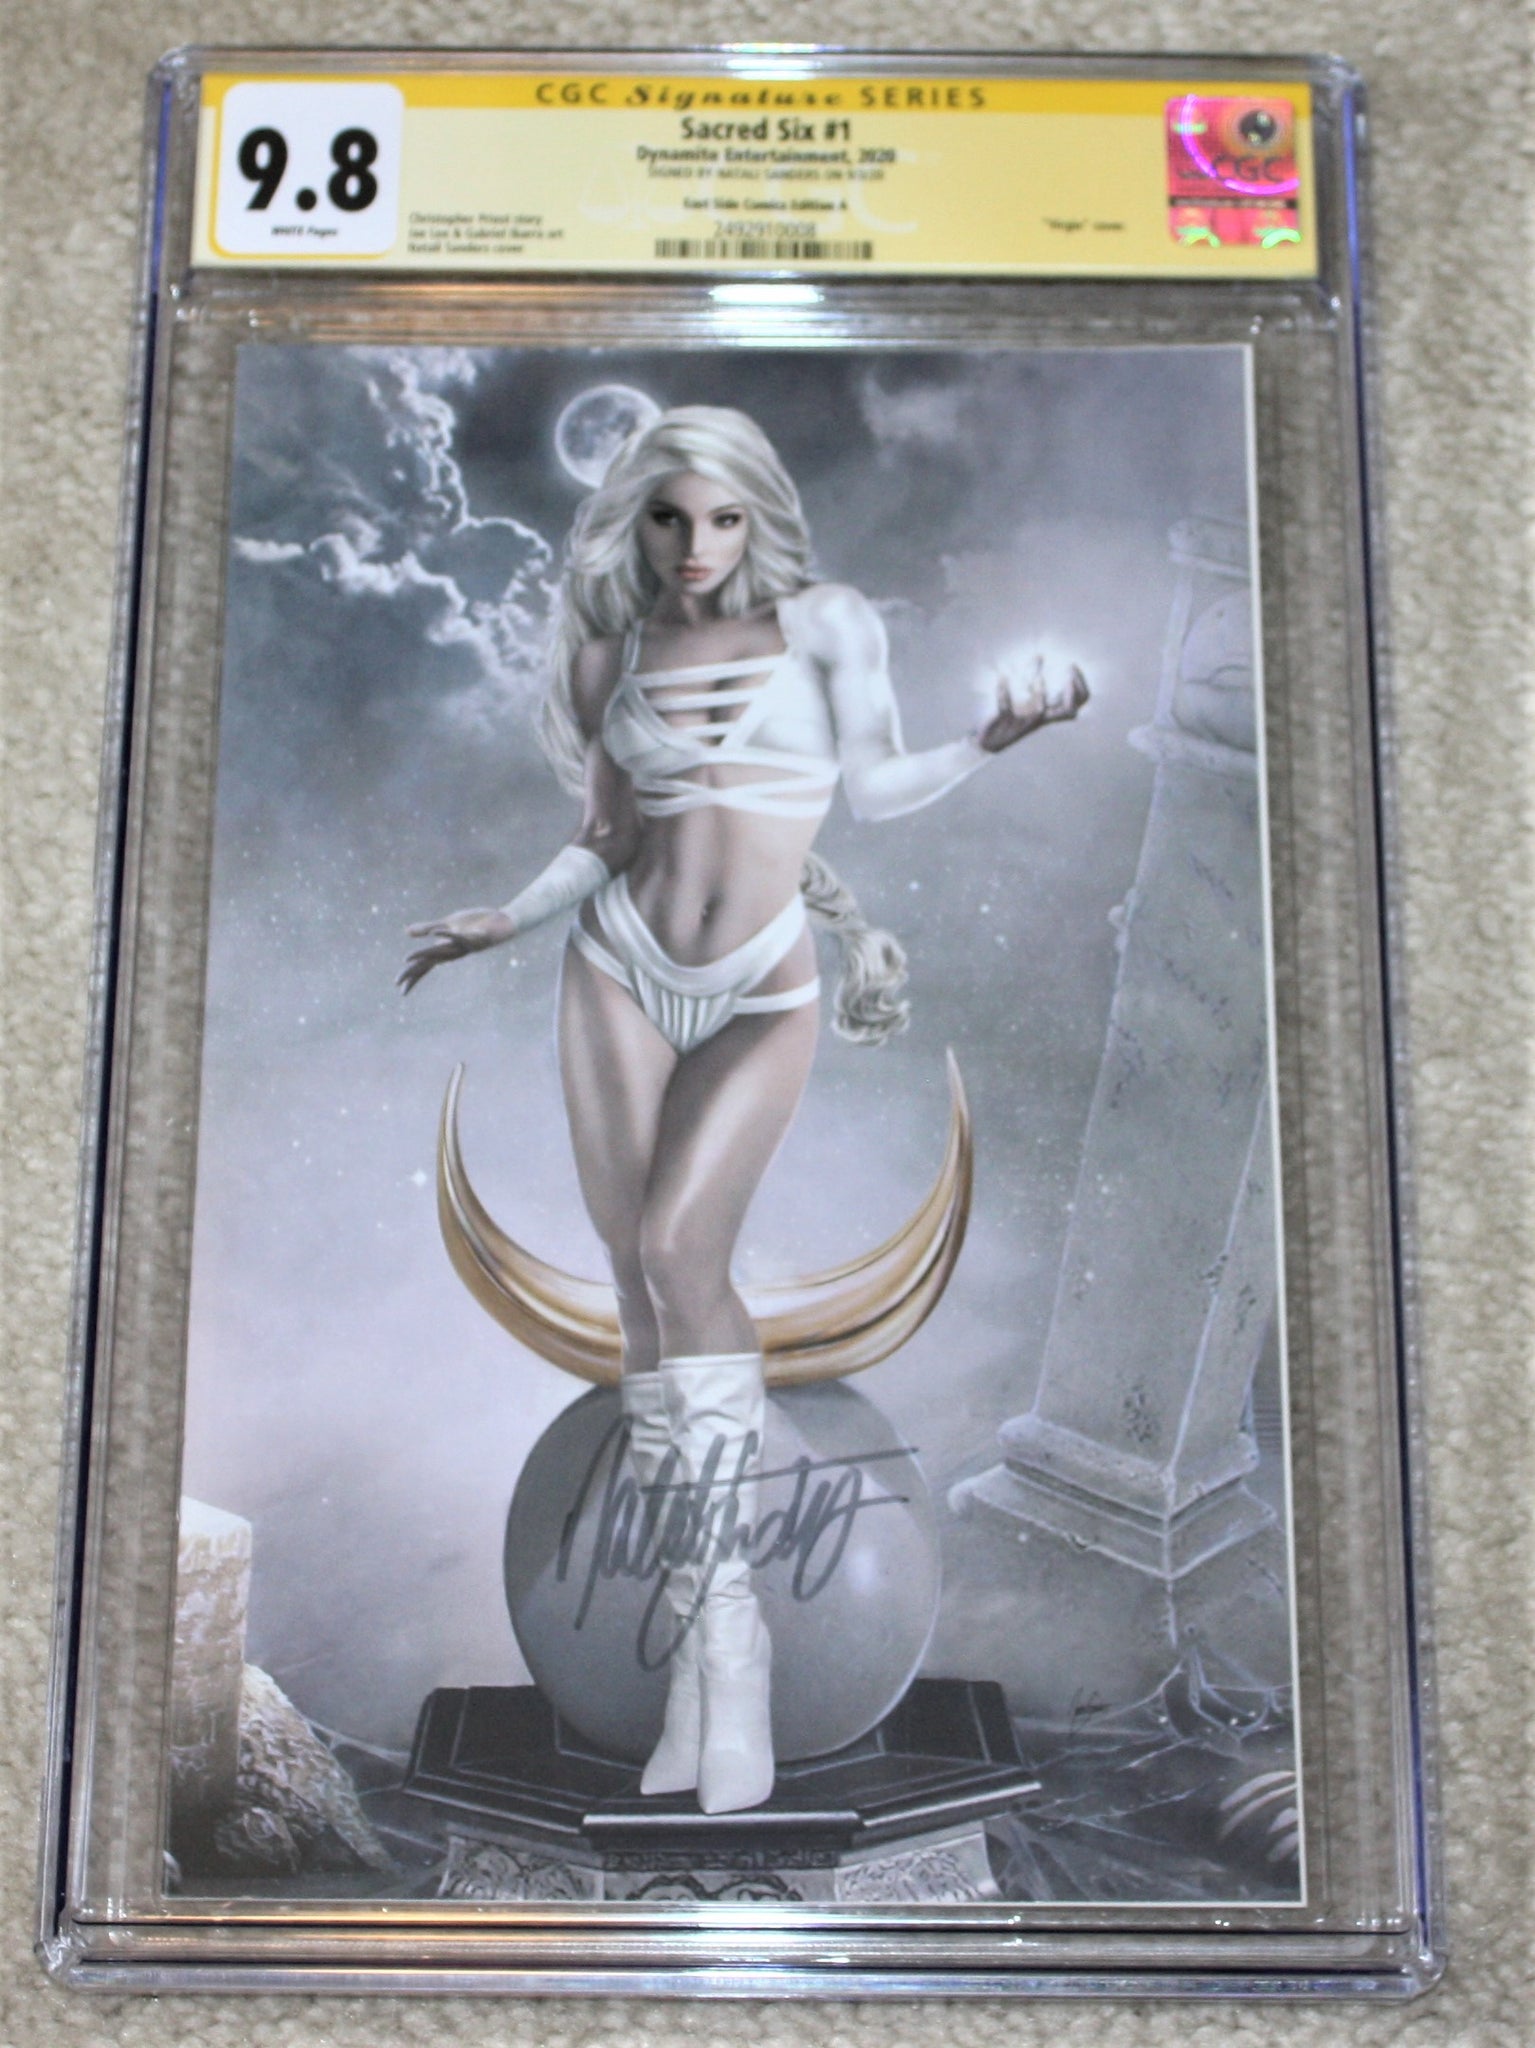 SACRED SIX #1 CGC SS 9.8 NATALI SANDERS SIGNED NYX VIRGIN EXCLUSIVE VARIANT